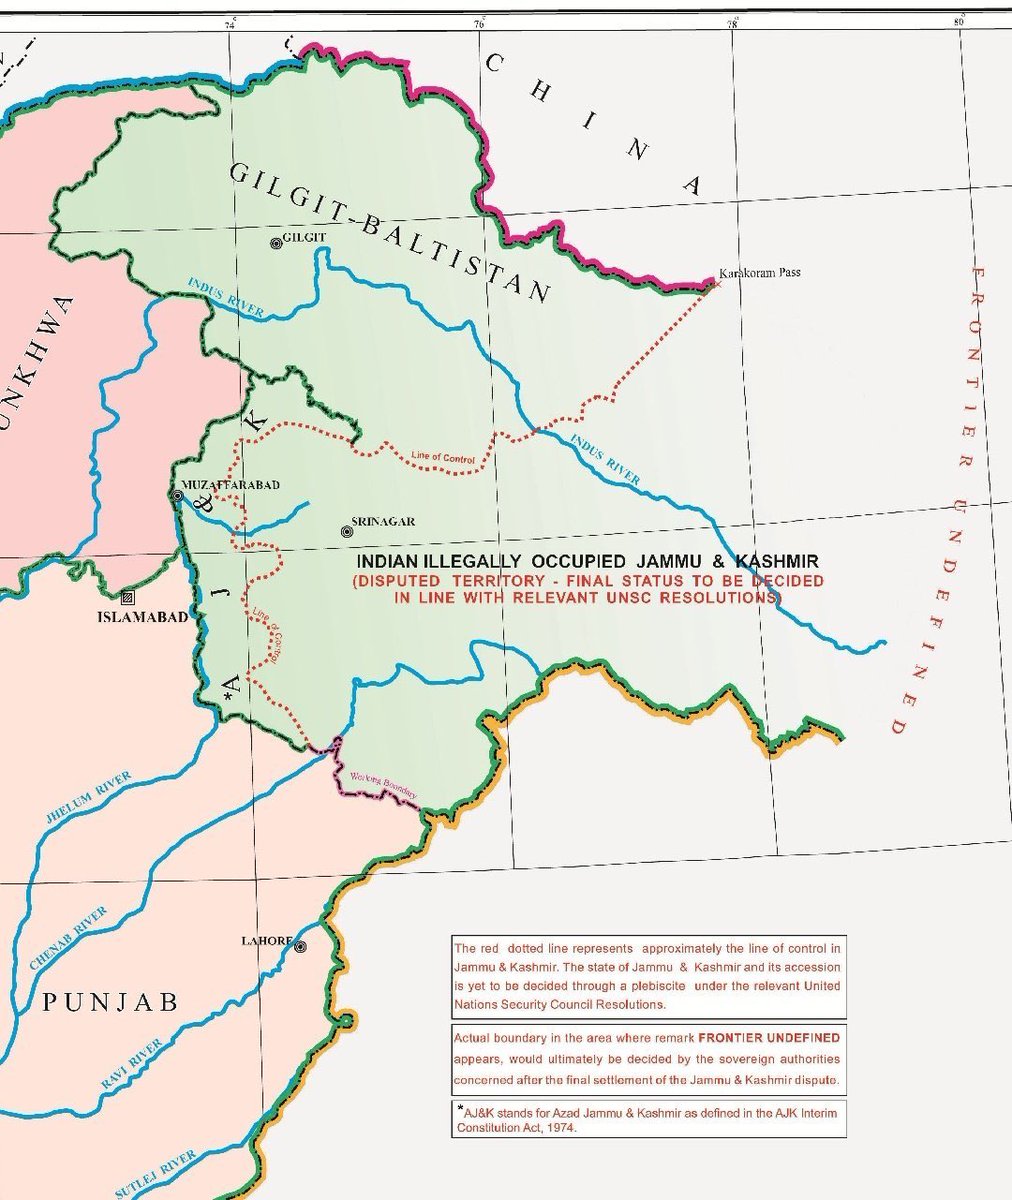 1) The map has in unequivocal terms declared the parts of Pakistani administered Kashmir as integral Pakistani Territory. This is a shift from the old maps depicting all of Pakistani administered parts either with Kashmir or only depicting Gilgit as Pakistan and -